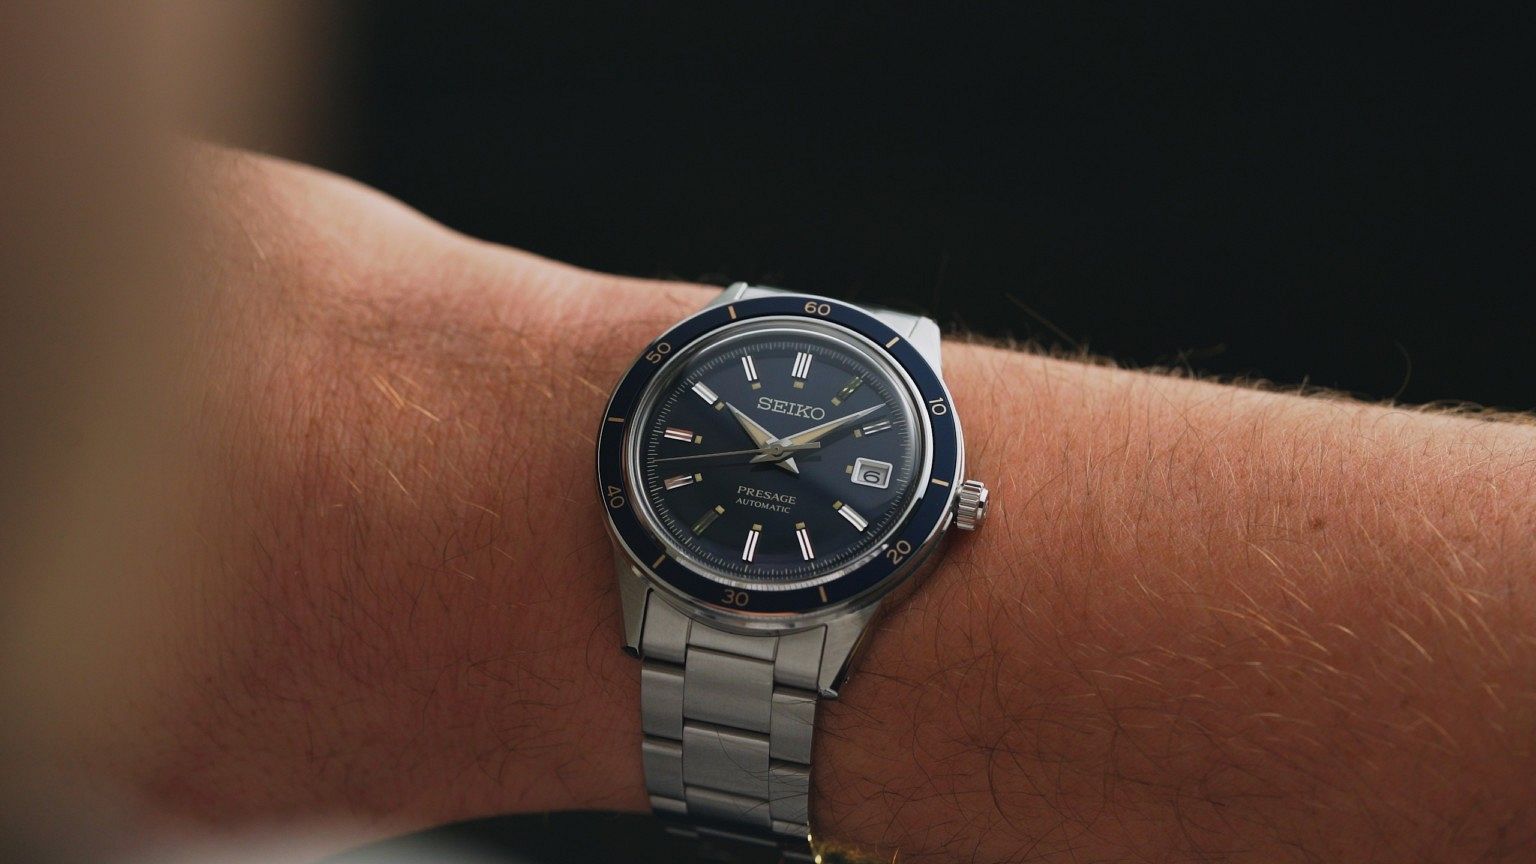 The Seiko Presage Style 60's is a slick everyday watch with a dapper edge